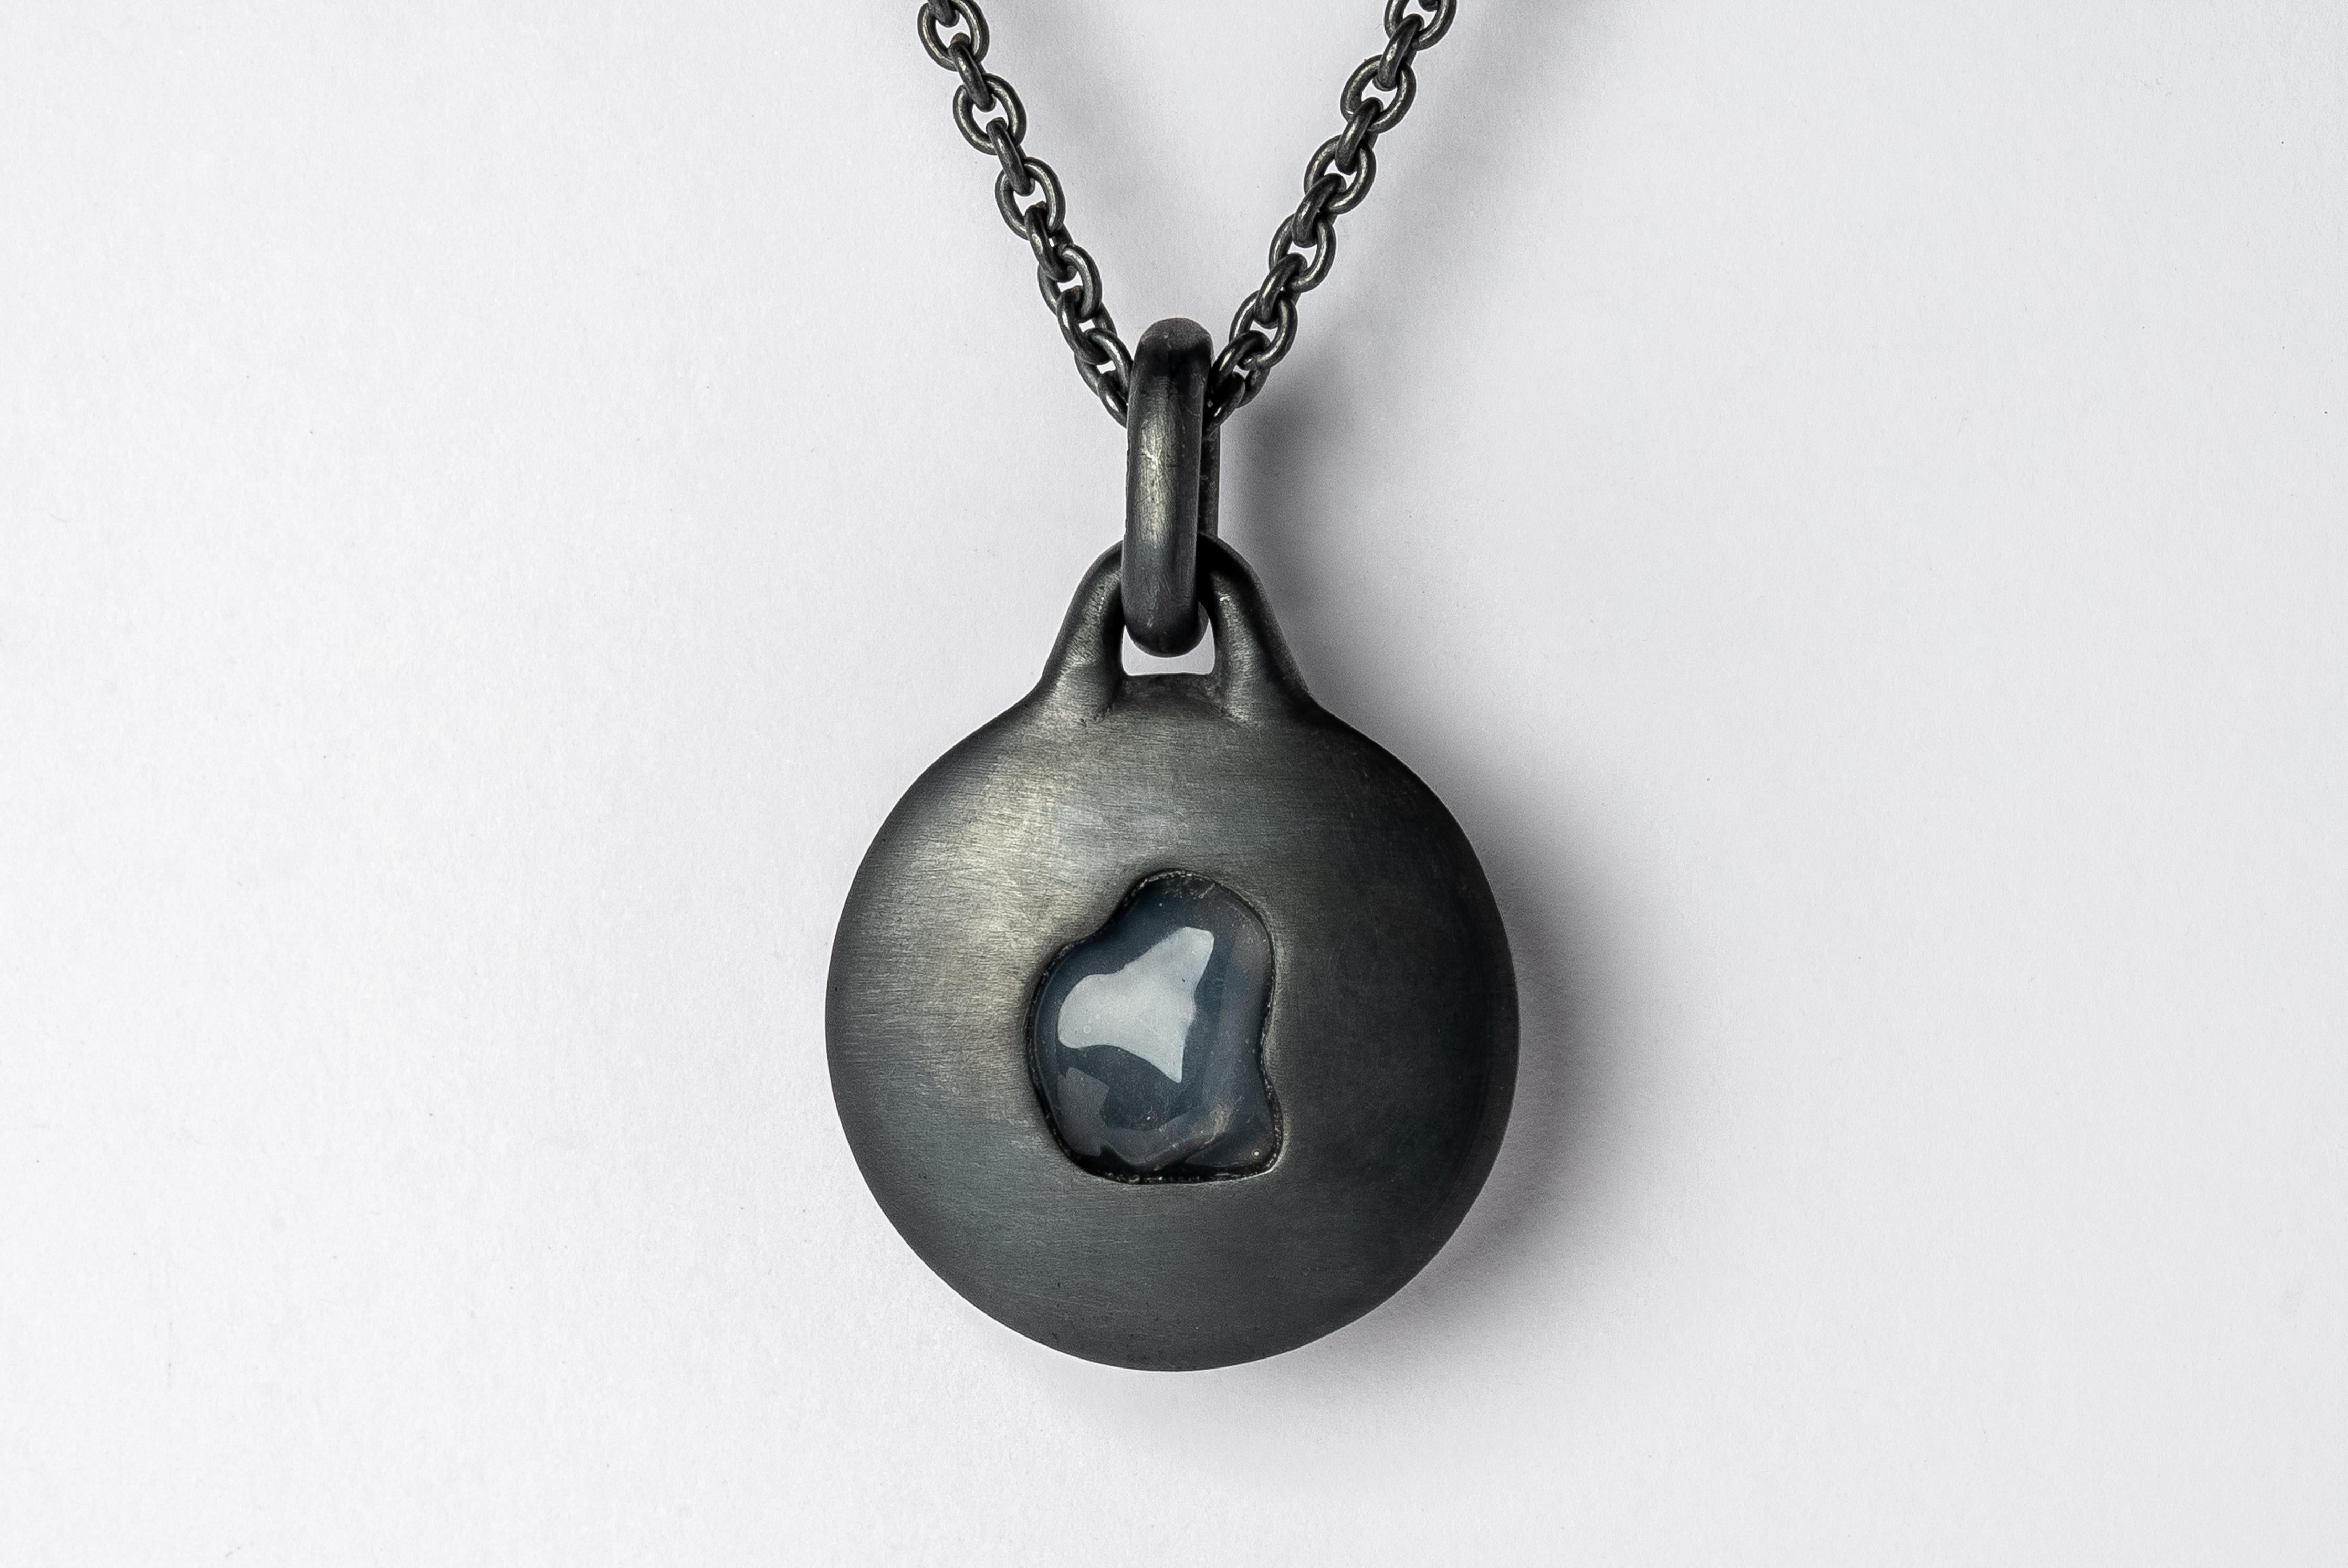 Necklace in the disk shape made in oxidized sterling silver and a slab of rough opal. The Disc family is essentially an Amulet, and they centralize focus onto the material. It comes on 74 cm sterling silver chain.